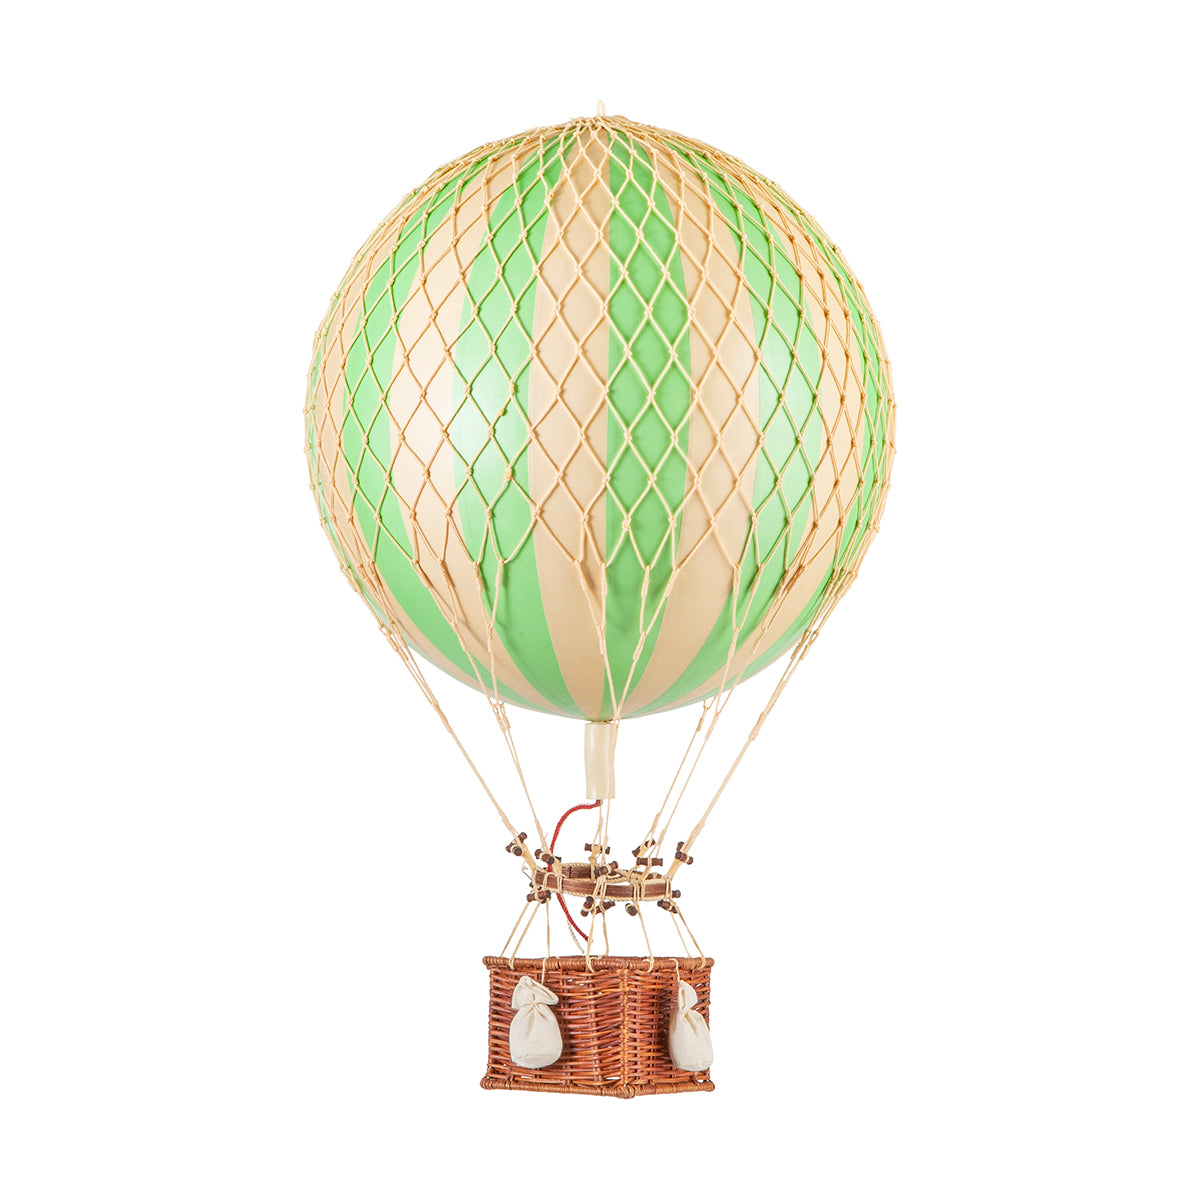 A unique Wonderen Medium Hot Air Balloon - Royal Aero with a basket, offering a new perspective from new heights.